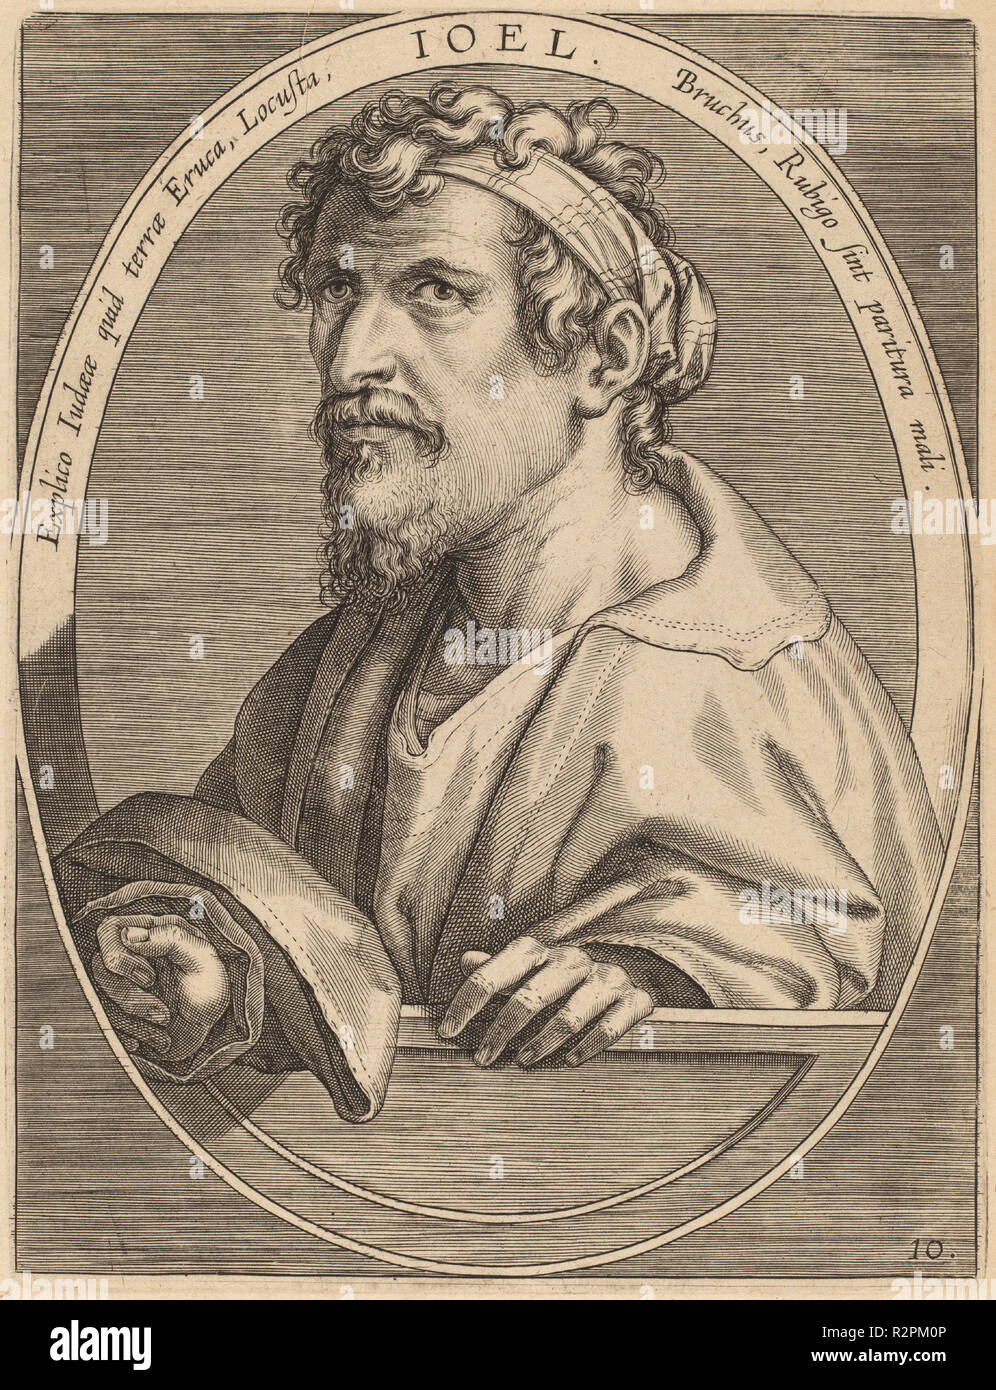 Joel. Dated: published 1613. Dimensions: plate: 17.6 x 13.4 cm (6 15/16 x 5 1/4 in.)  sheet: 24.3 x 19.1 cm (9 9/16 x 7 1/2 in.). Medium: engraving on laid paper. Museum: National Gallery of Art, Washington DC. Author: Theodor Galle after Jan van der Straet. Stock Photo